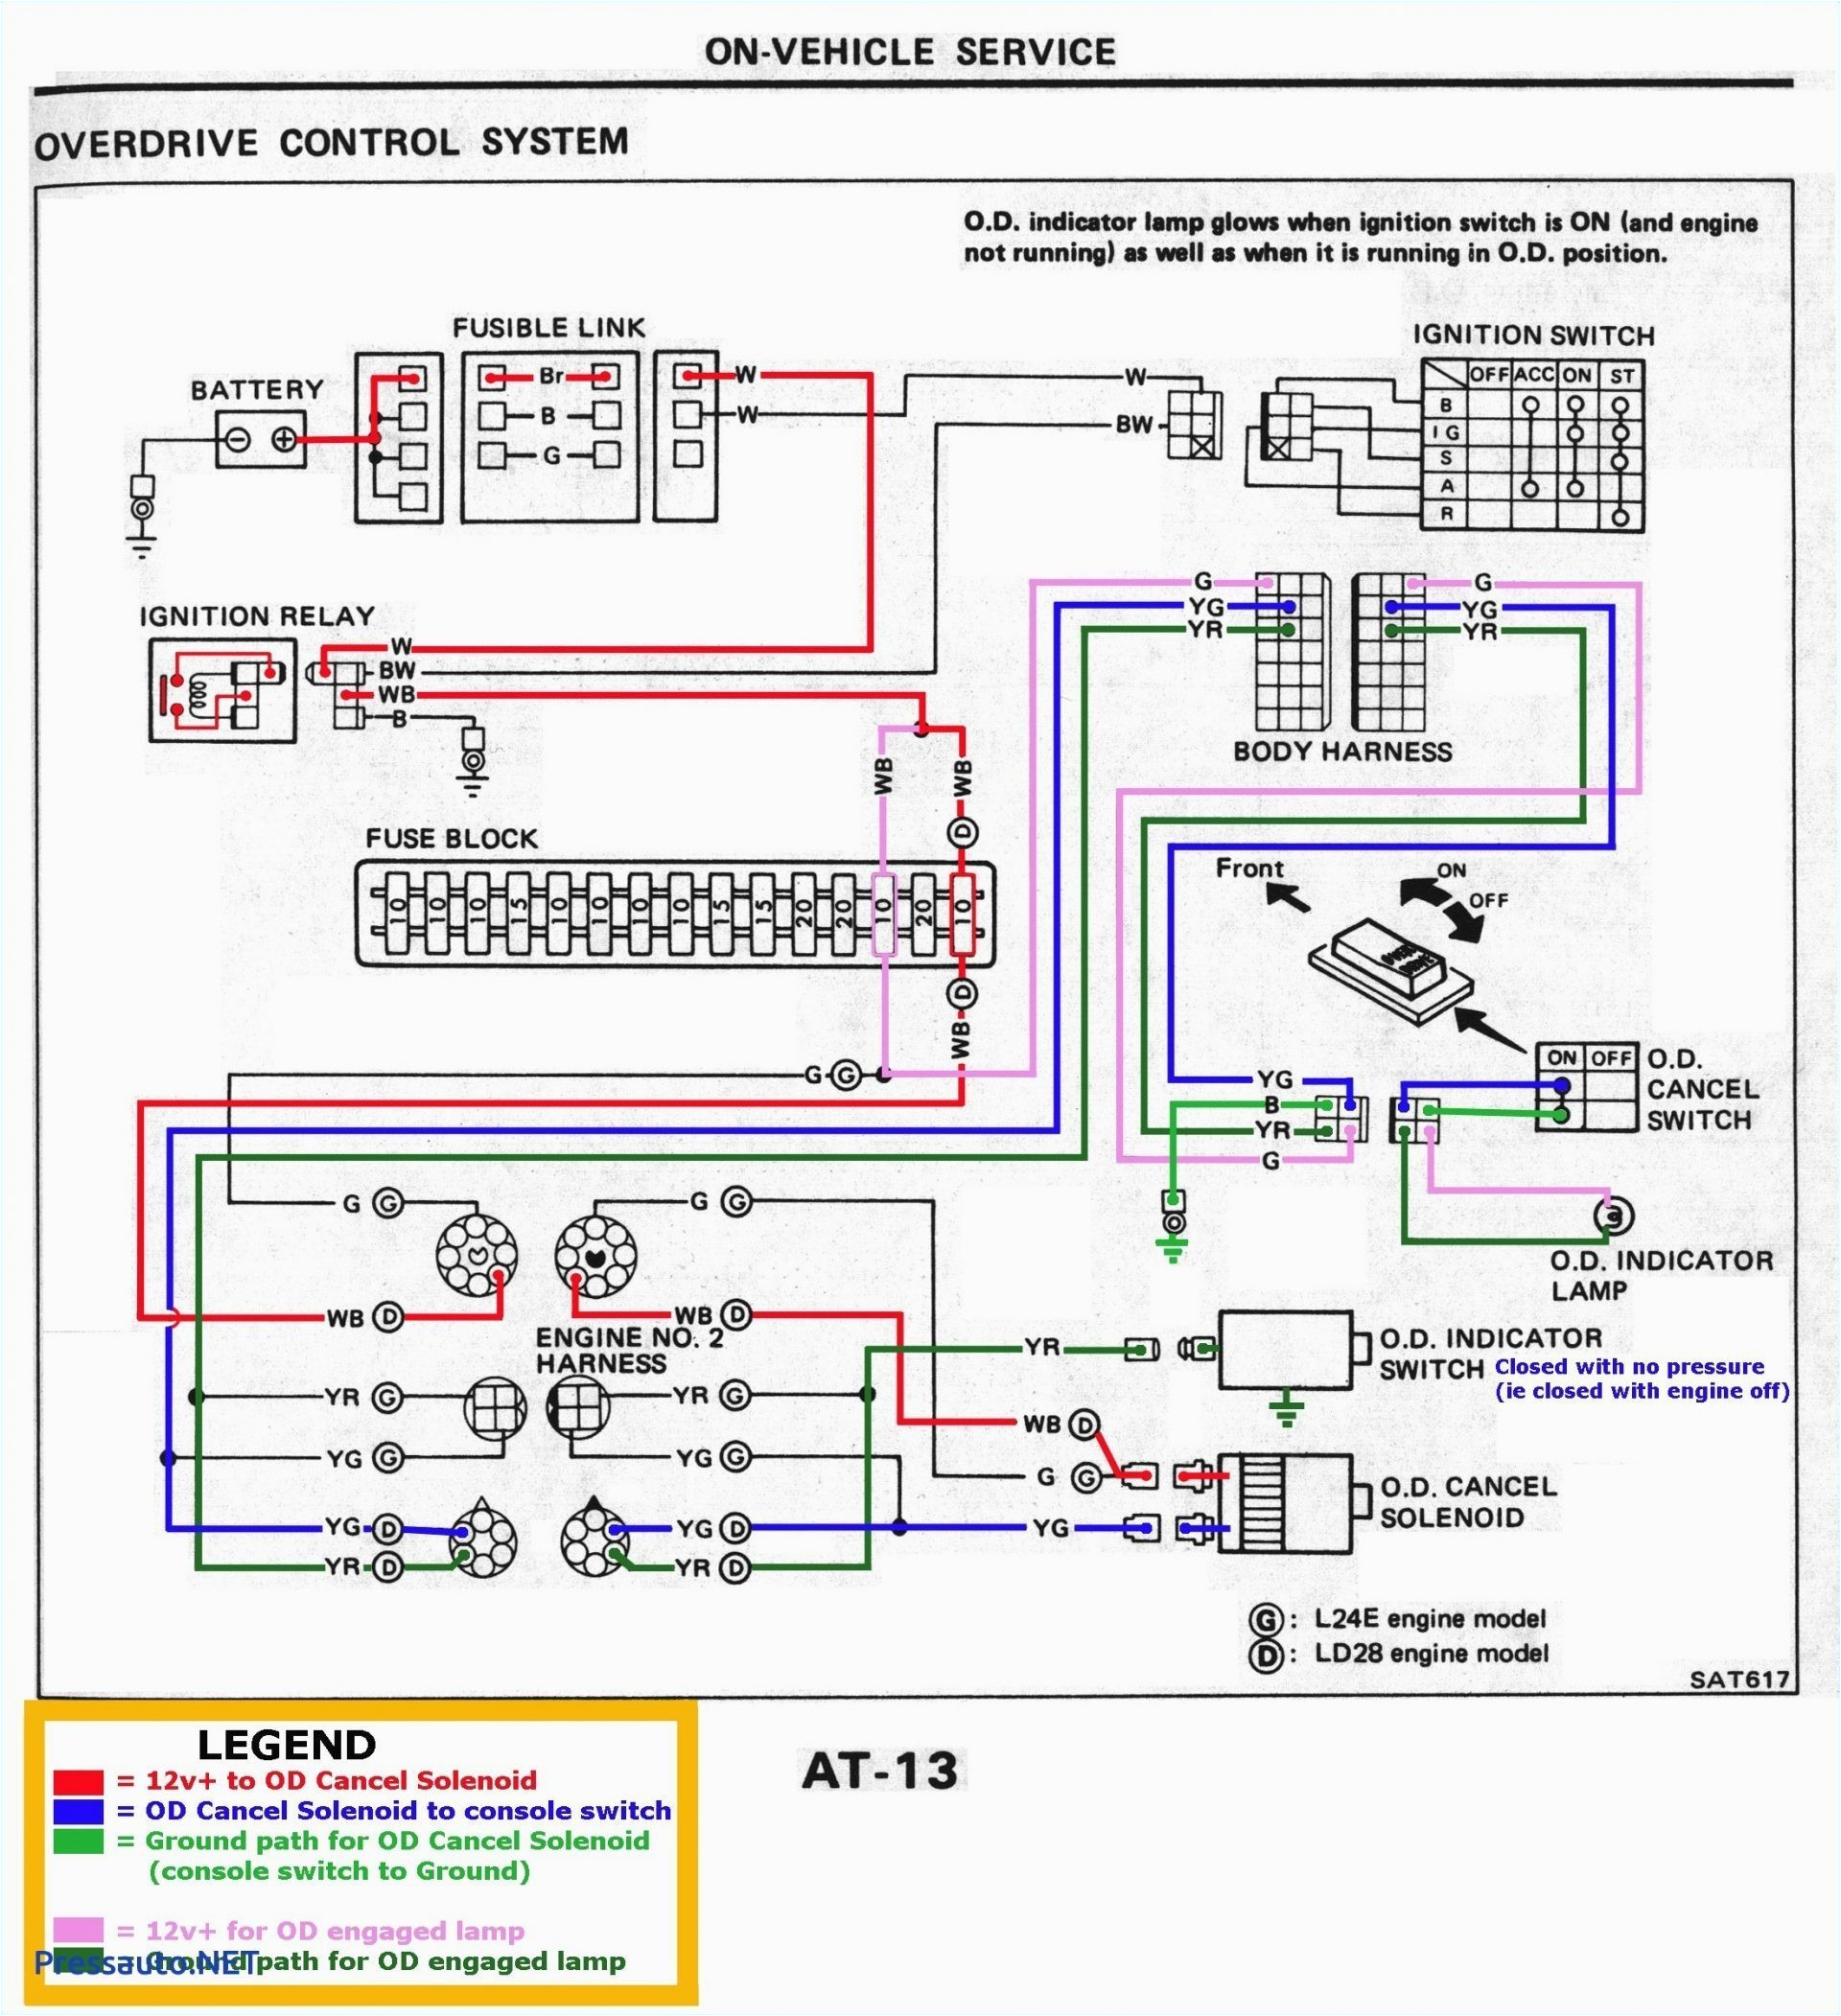 circuit furthermore led light simple circuit diagram also book light bulb circuit diagram as well as 3 switch box wiring diagram